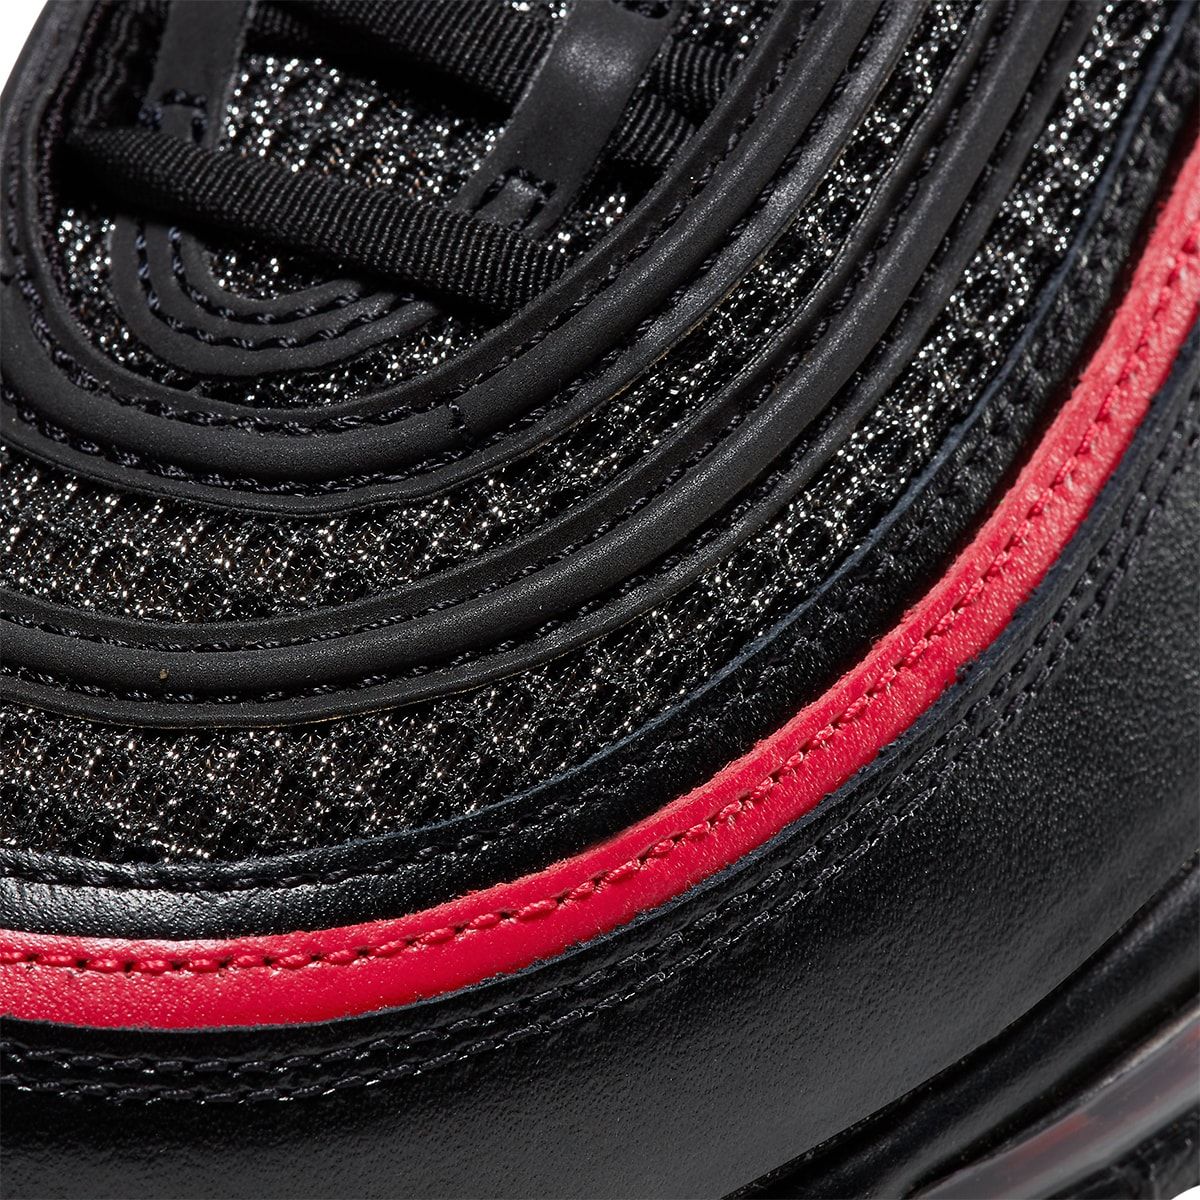 air max 97 valentine's day 2020 release date